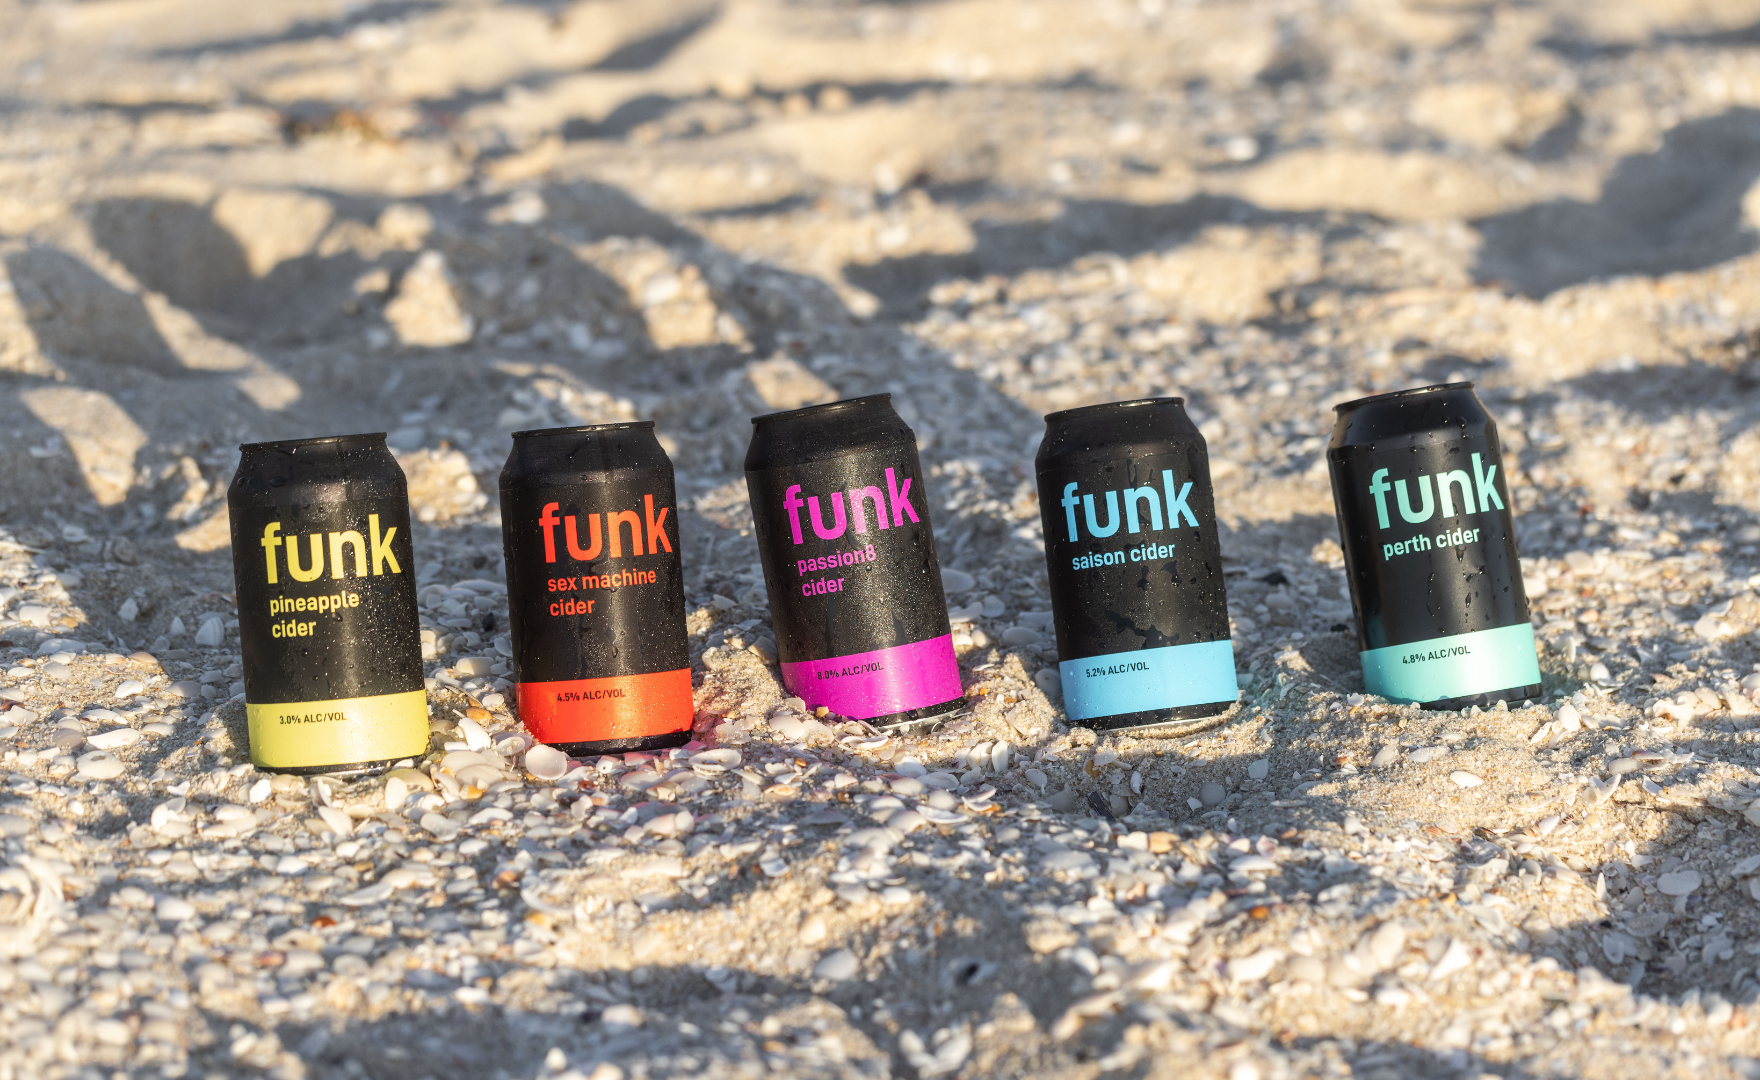 Funk Cider Products on Beach